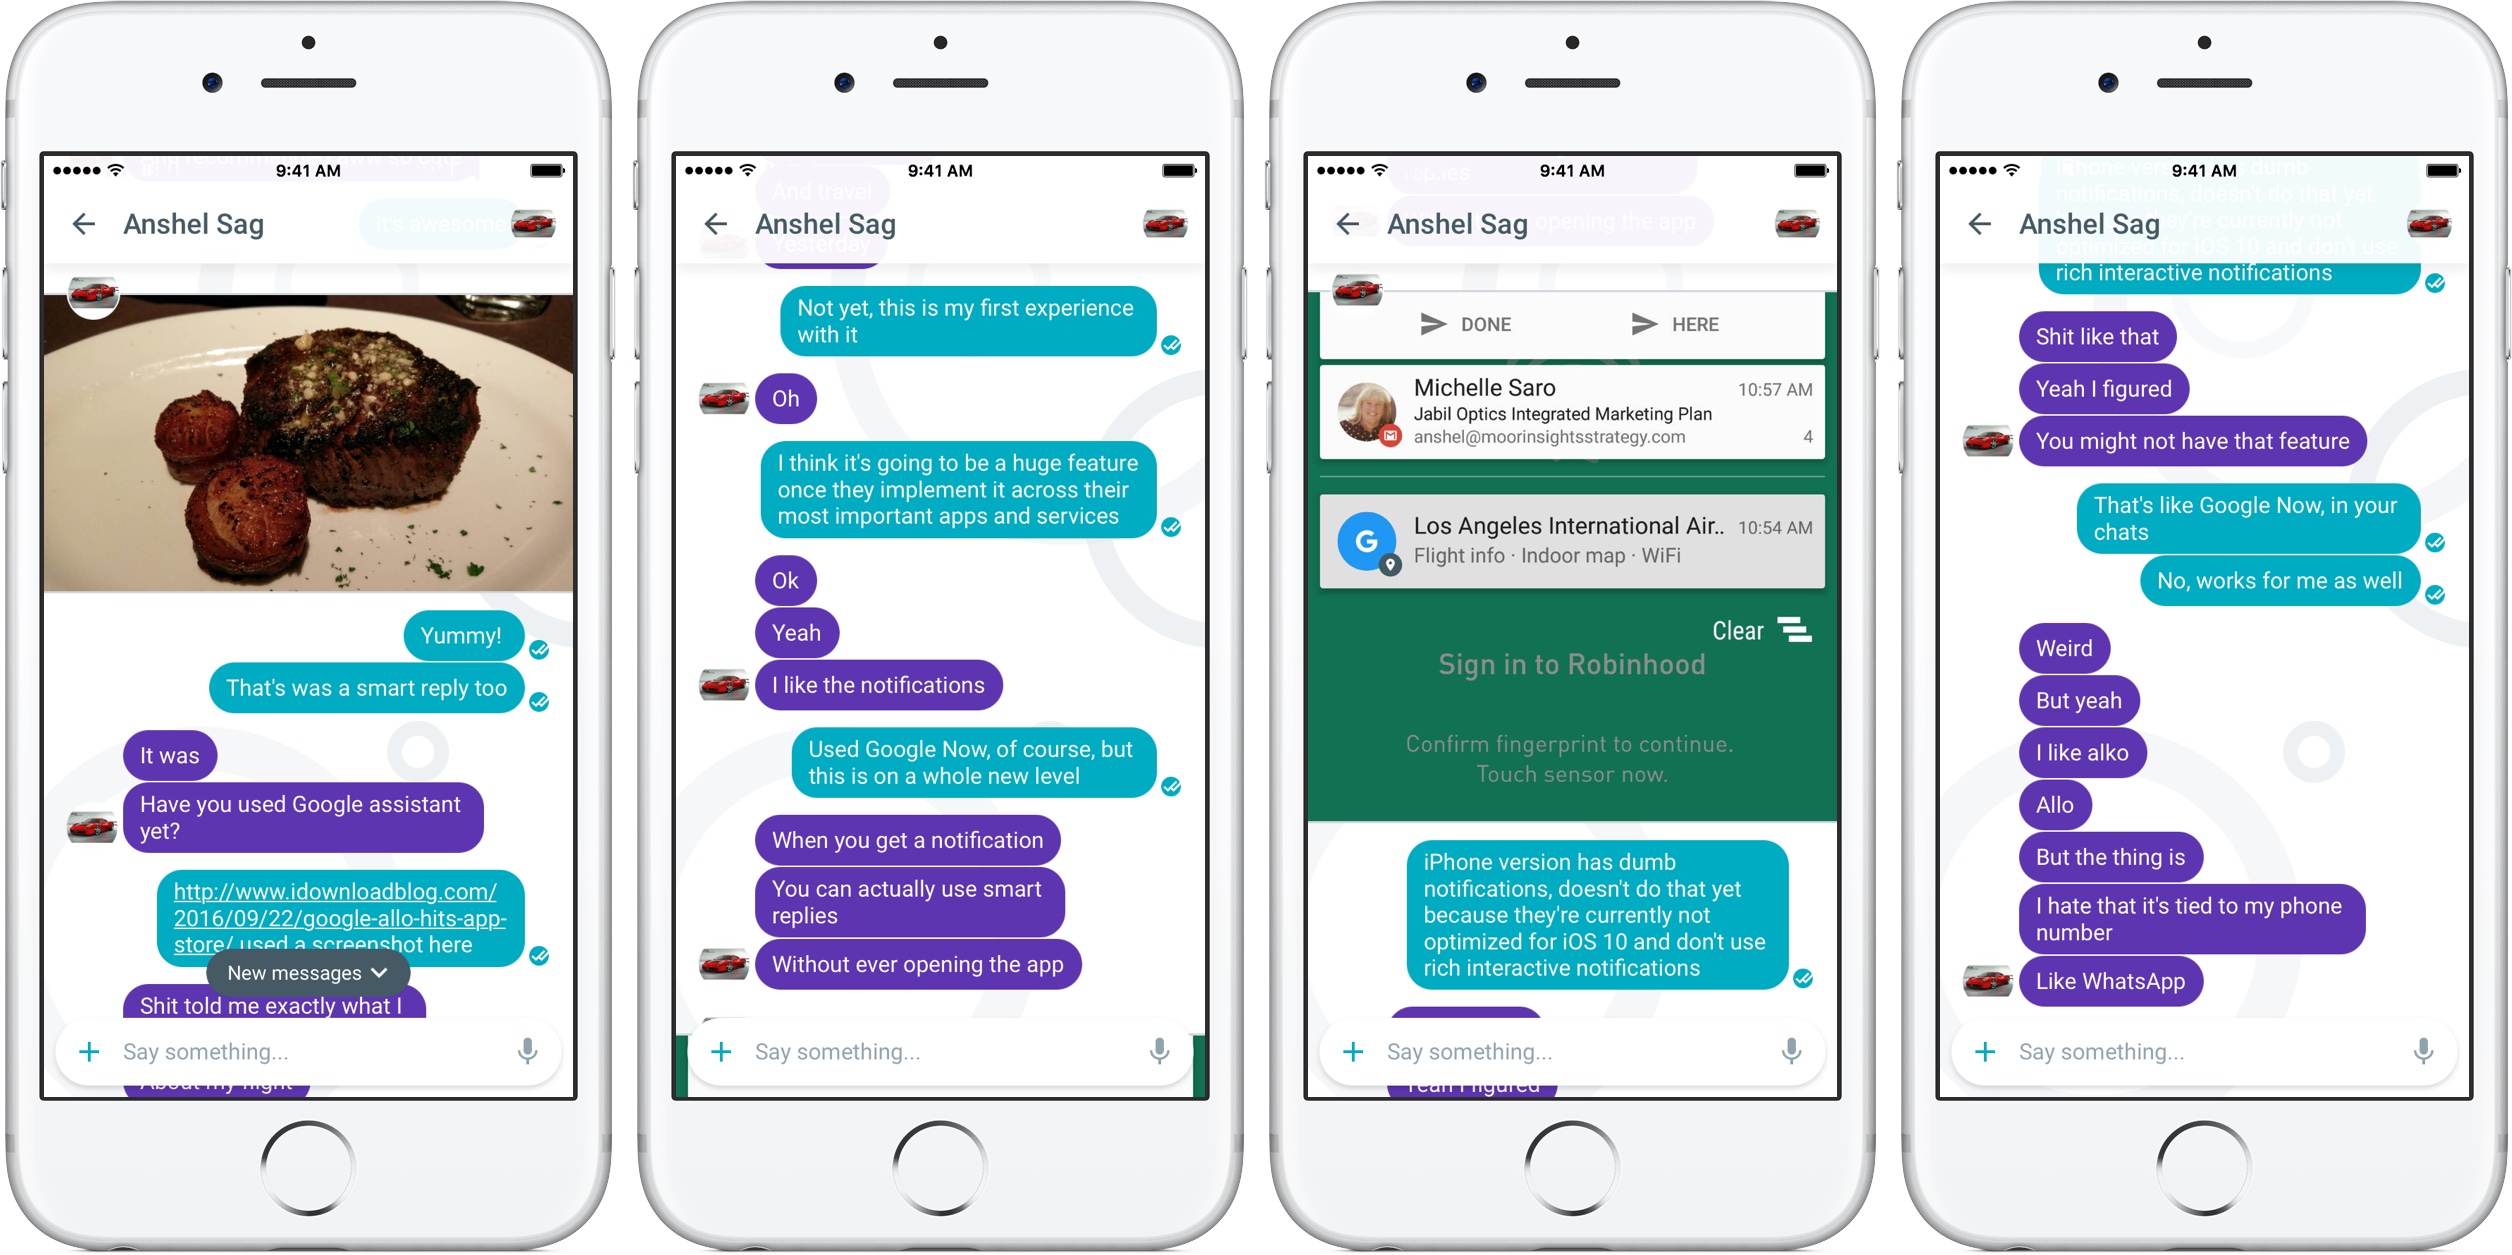 Google, Allo, Messaging app, March 2019, Android Messages app, Video calling app Duo, WhatsApp, Apple iMessage, Technology news